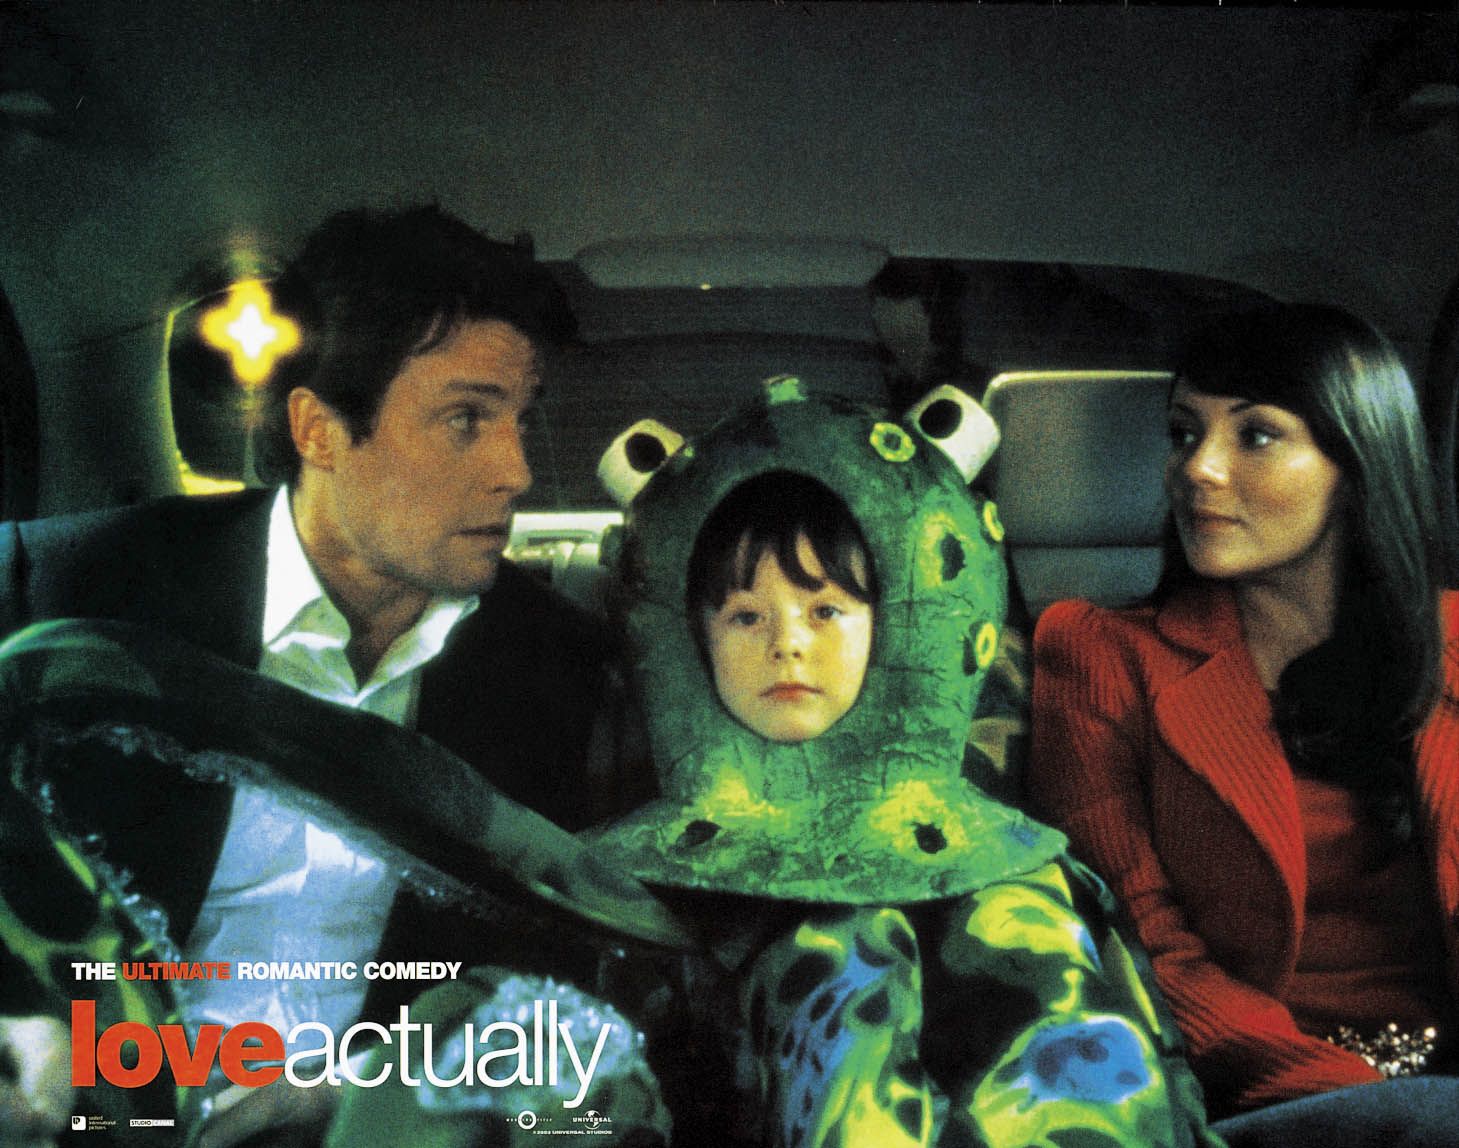 Why We’re All Still Watching ‘Love Actually’